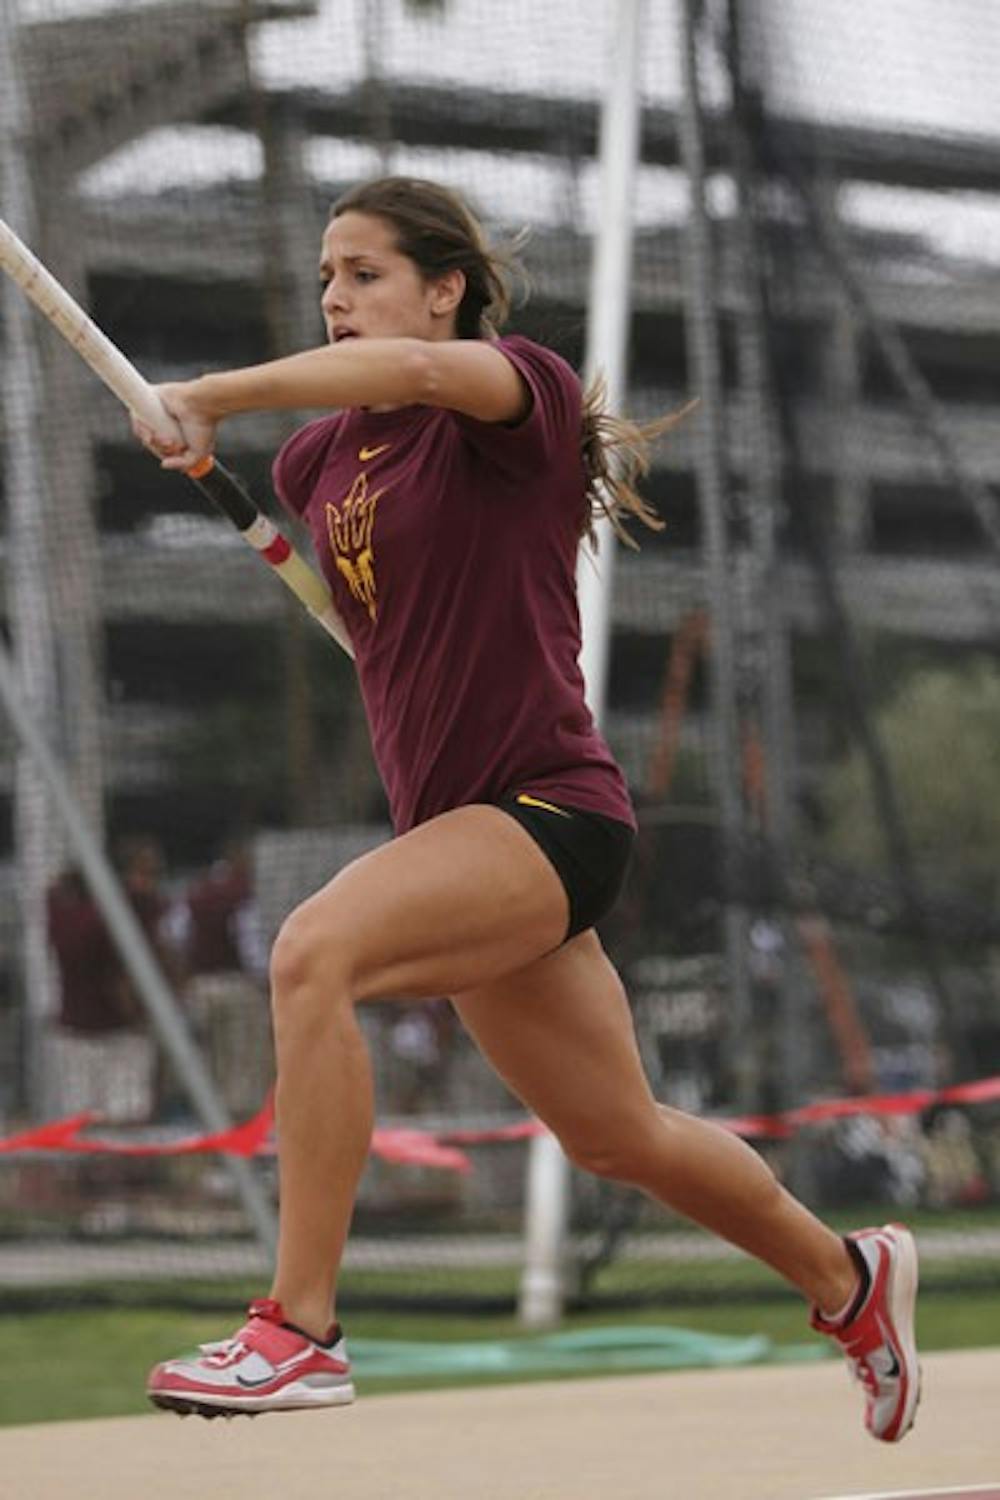 Junior Shaylah Simpson sprints forward to get ready for her pole vault at the Castillo Invitational on Mar. 17, 2012. Field athletes like Simpson will have to step up against the competition at the Texas A&M Invitational. (Photo by Samuel Rosenbaum)